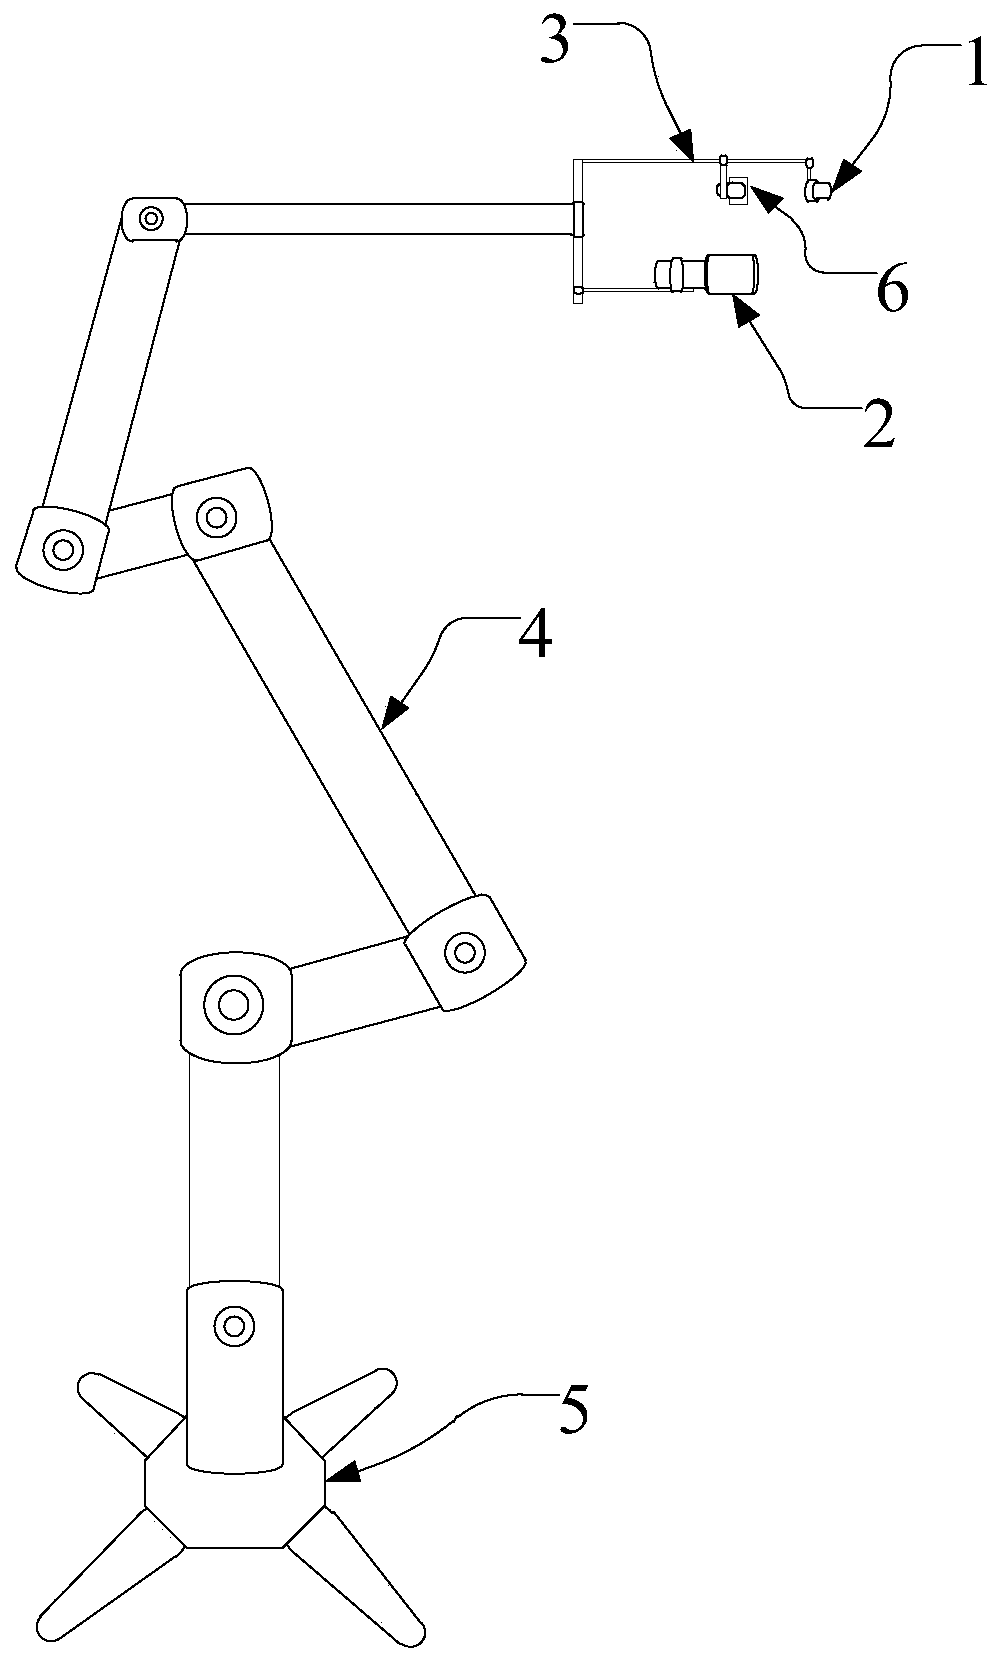 Automatic body temperature measuring device and method based on collaborative robot